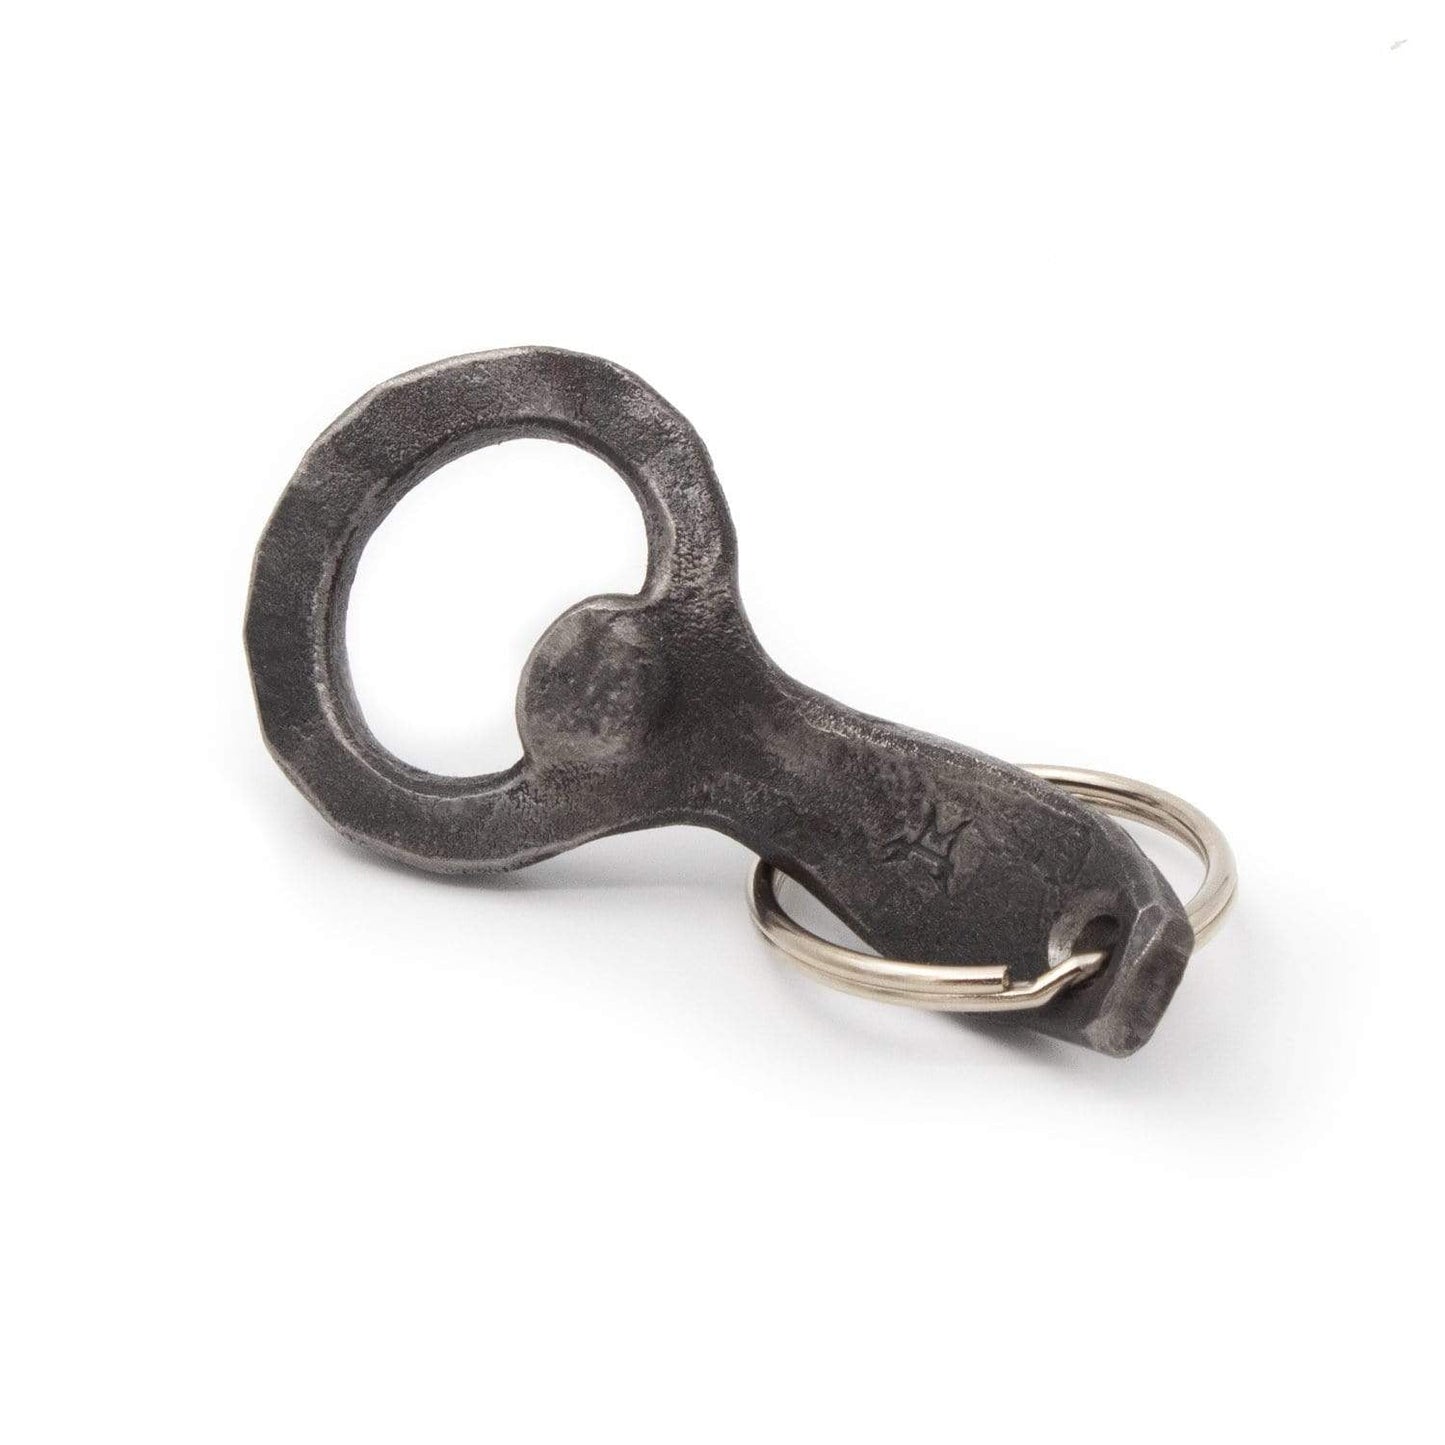 Hand Forged Keychain Bottle Opener - The Tool Store